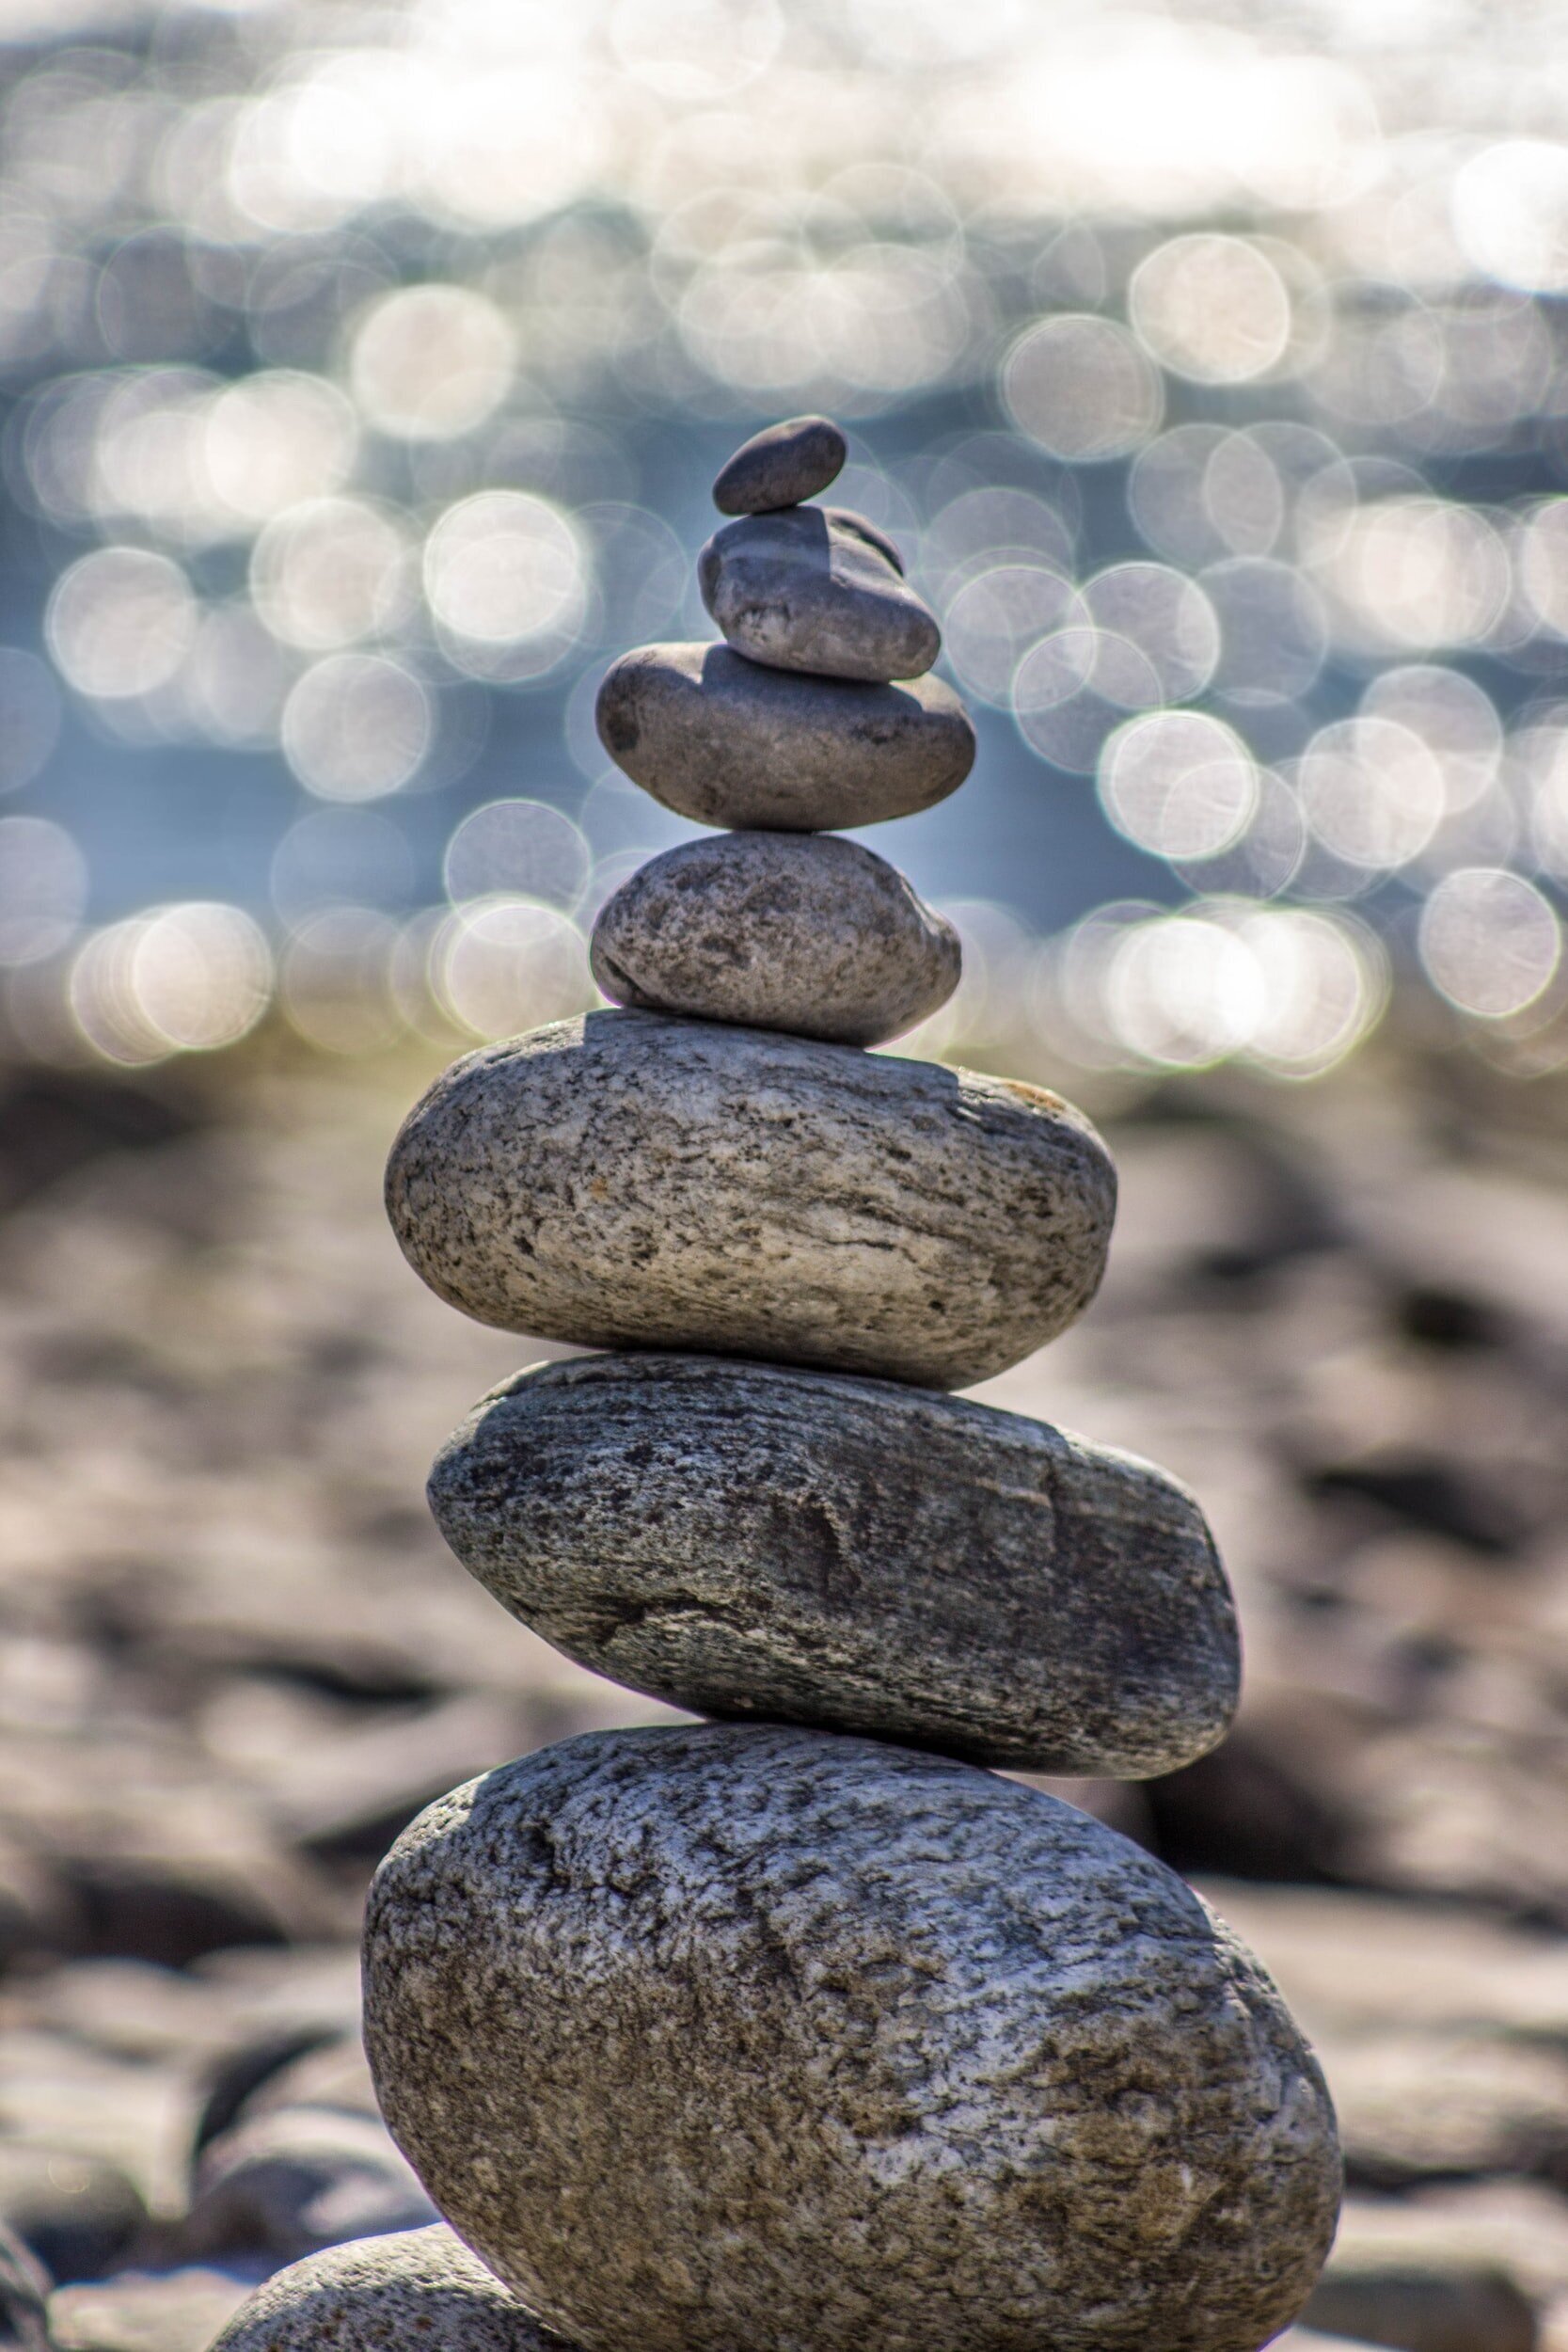 Image by Deniz Altindas on UnsplashPhoto of Rocks piled on top of each other to represent the balancing act of mental health.